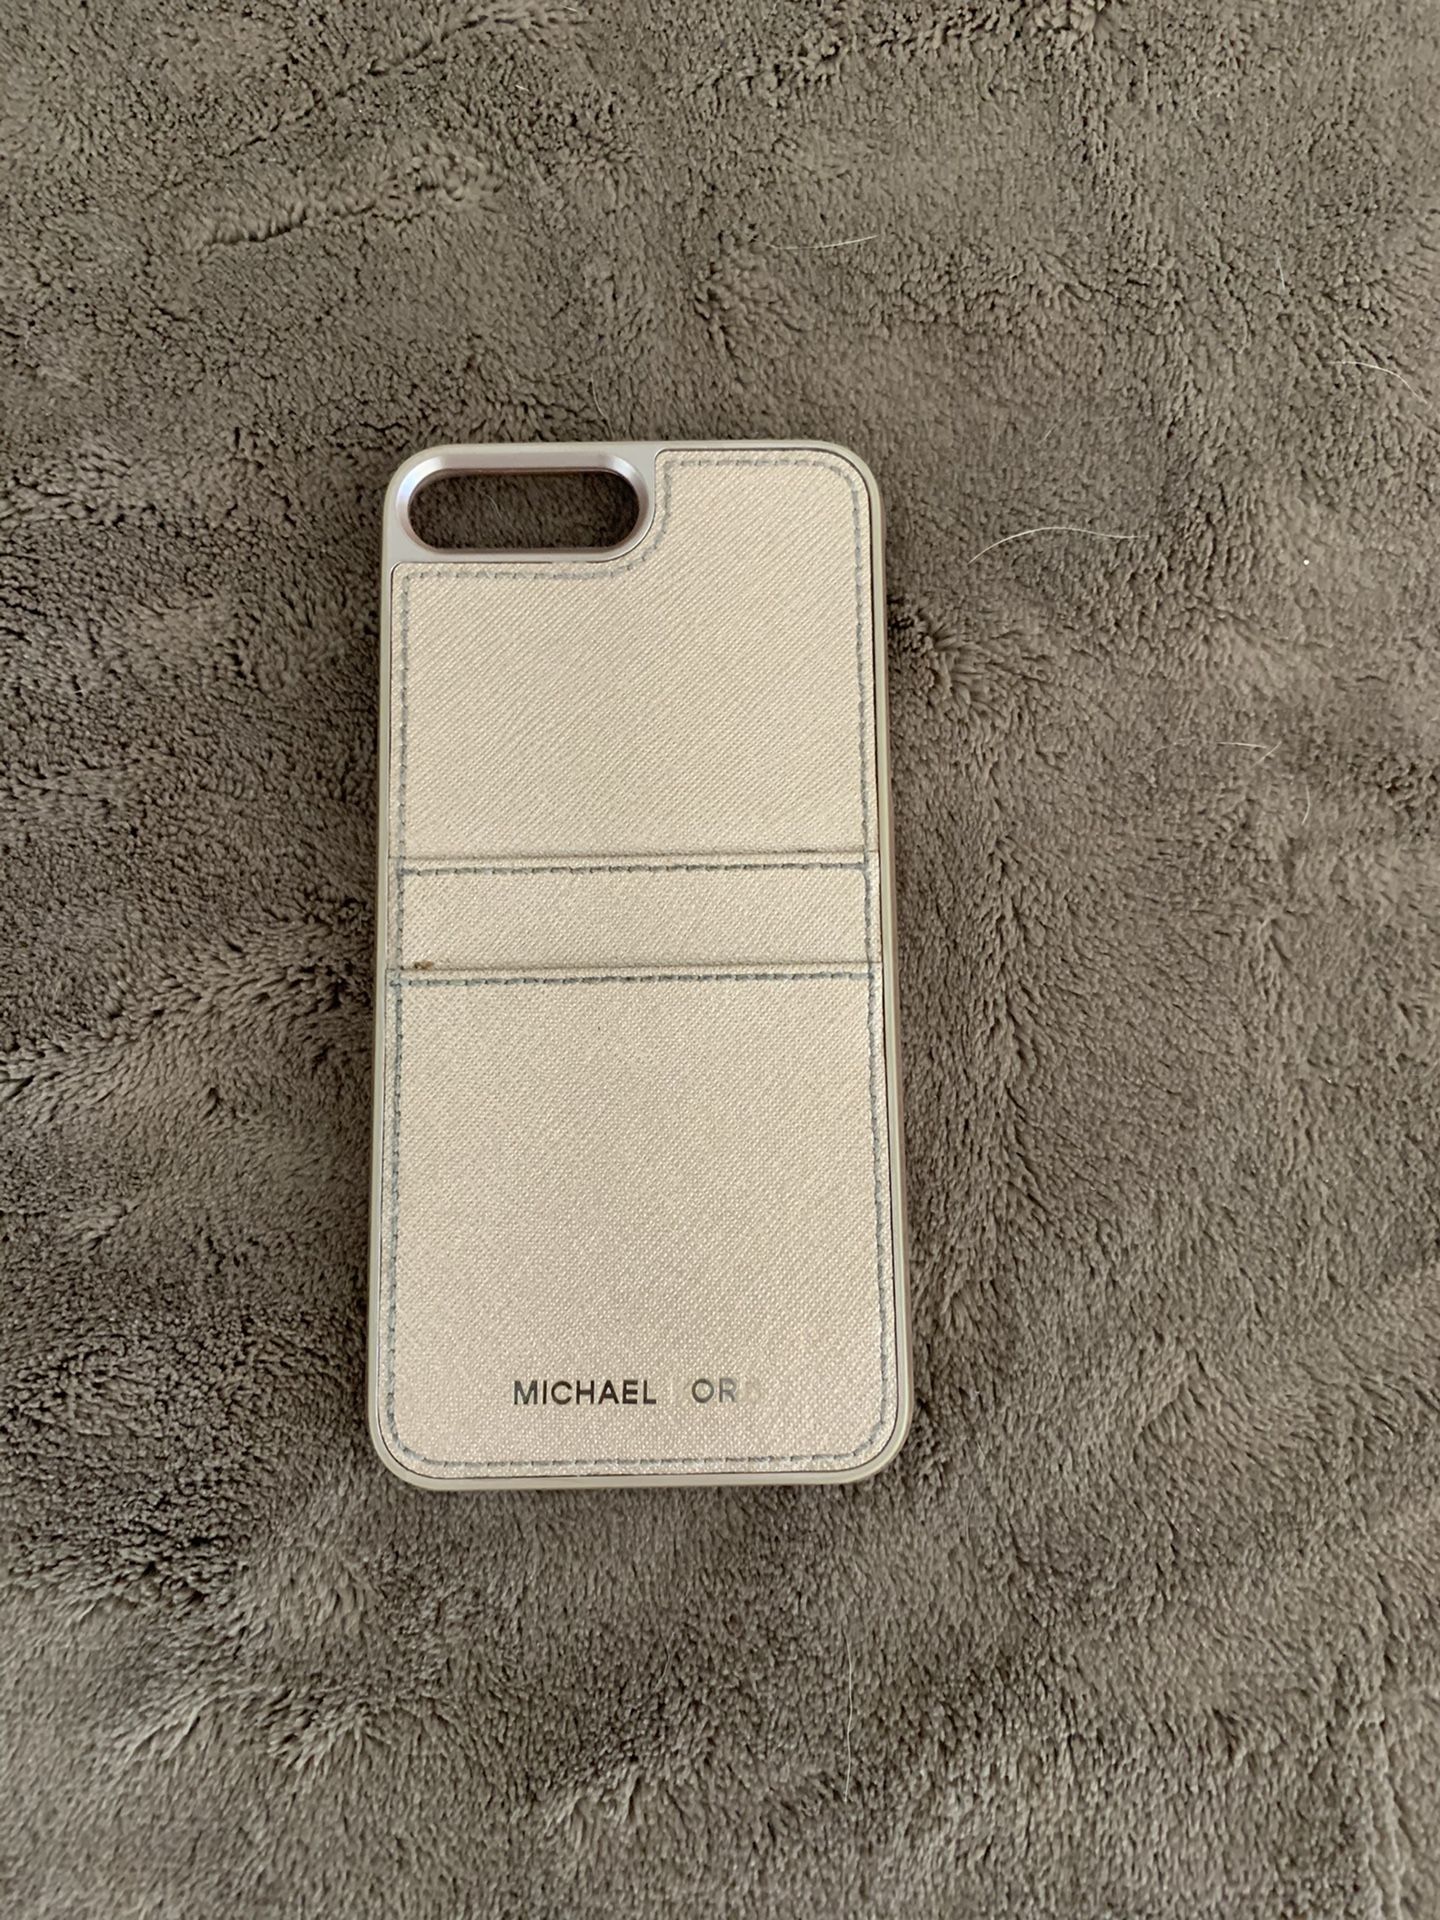 Micheal Kors iPhone case for iPhone 6s Plus